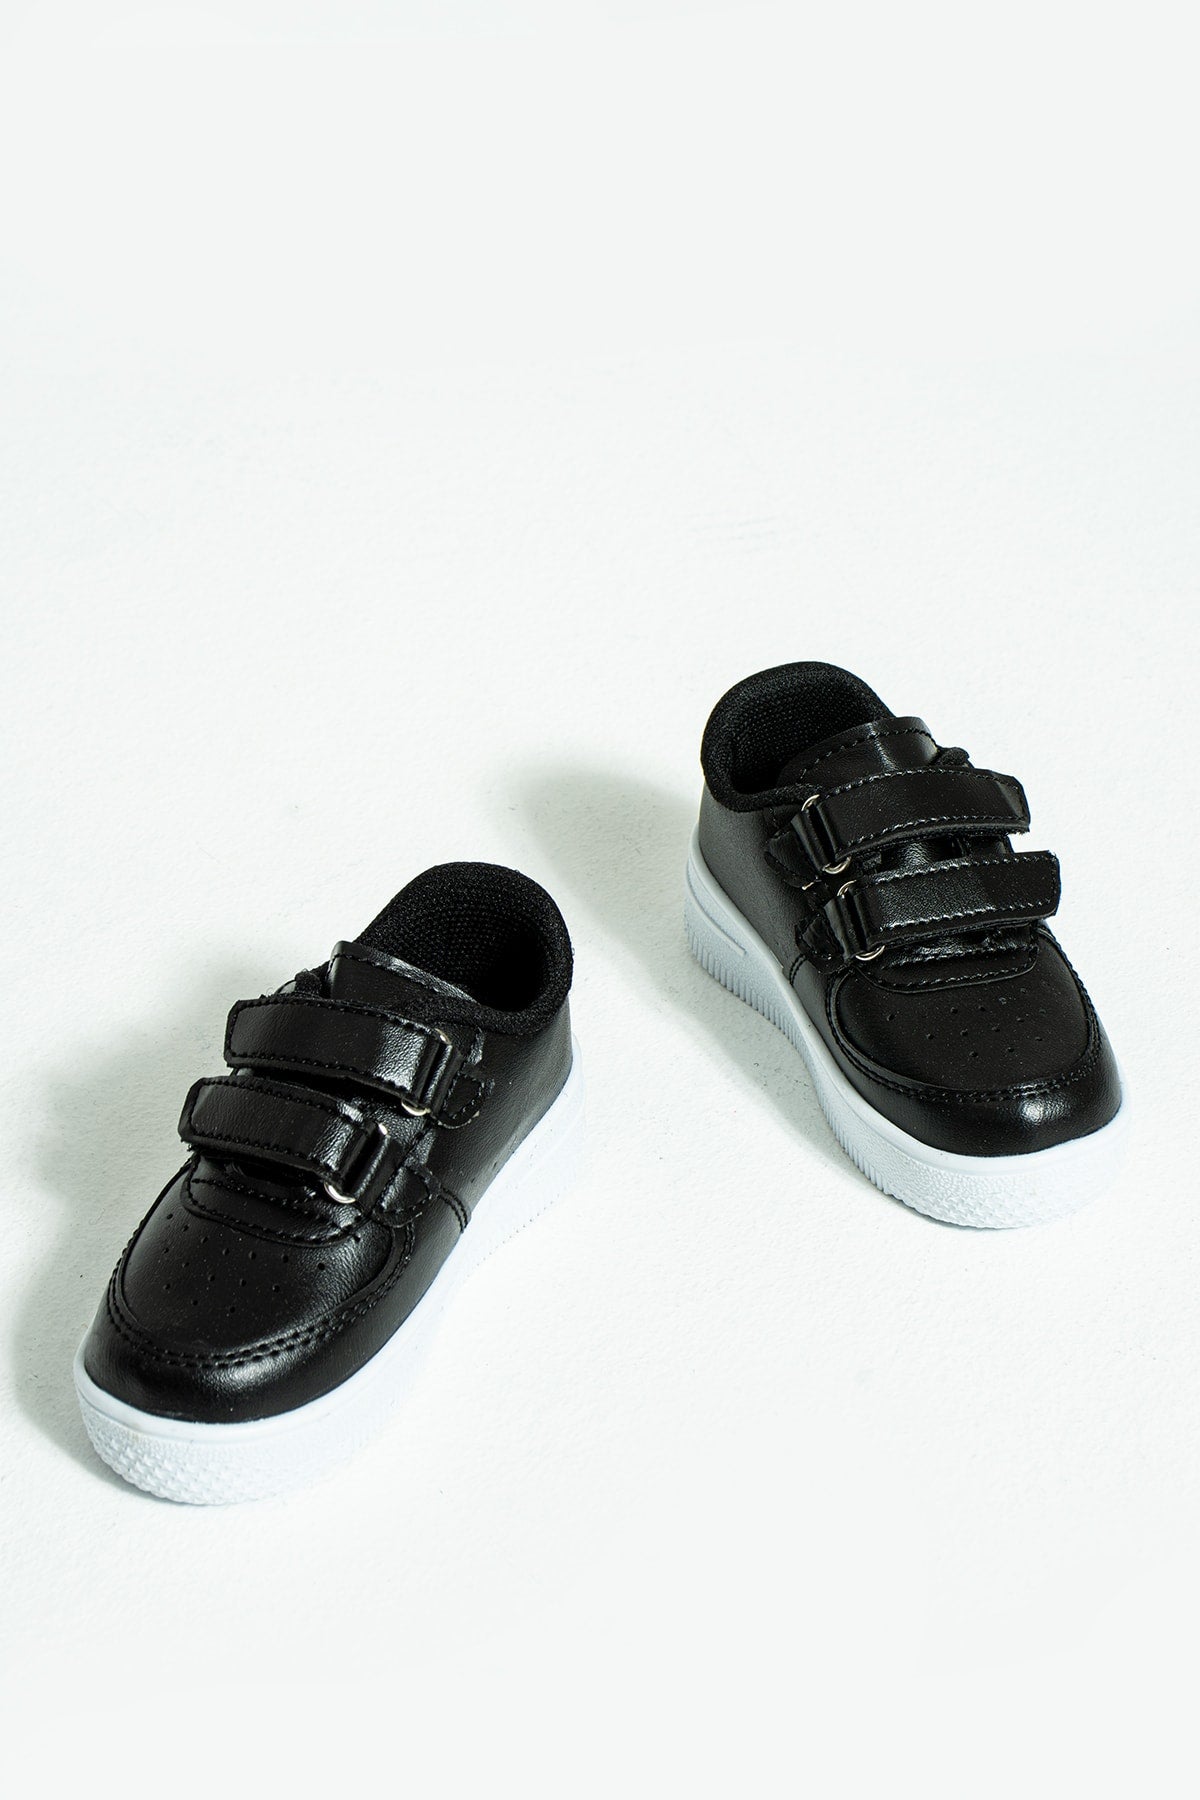 Kids Black and White Sneakers Velcro Kids Shoes